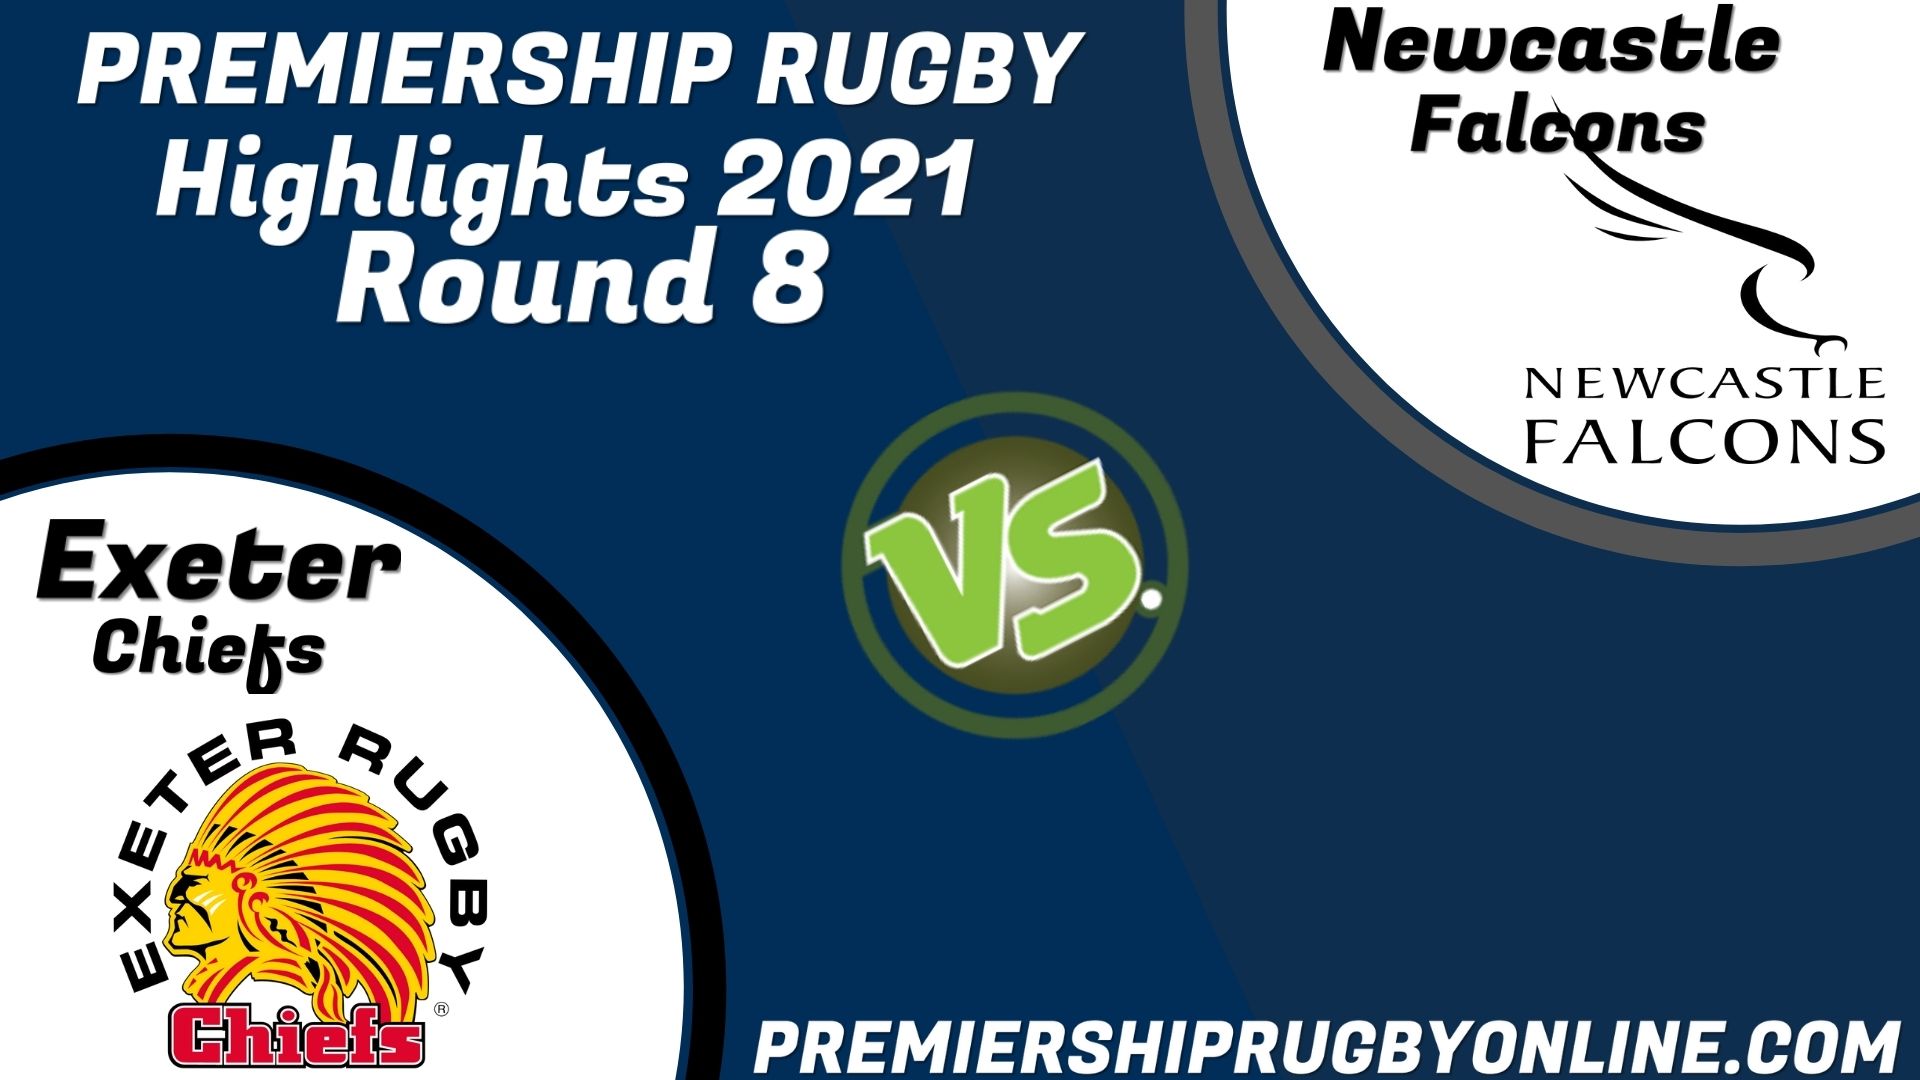 Exeter Chiefs Vs Newcastle Falcons Highlights 2021 RD 8